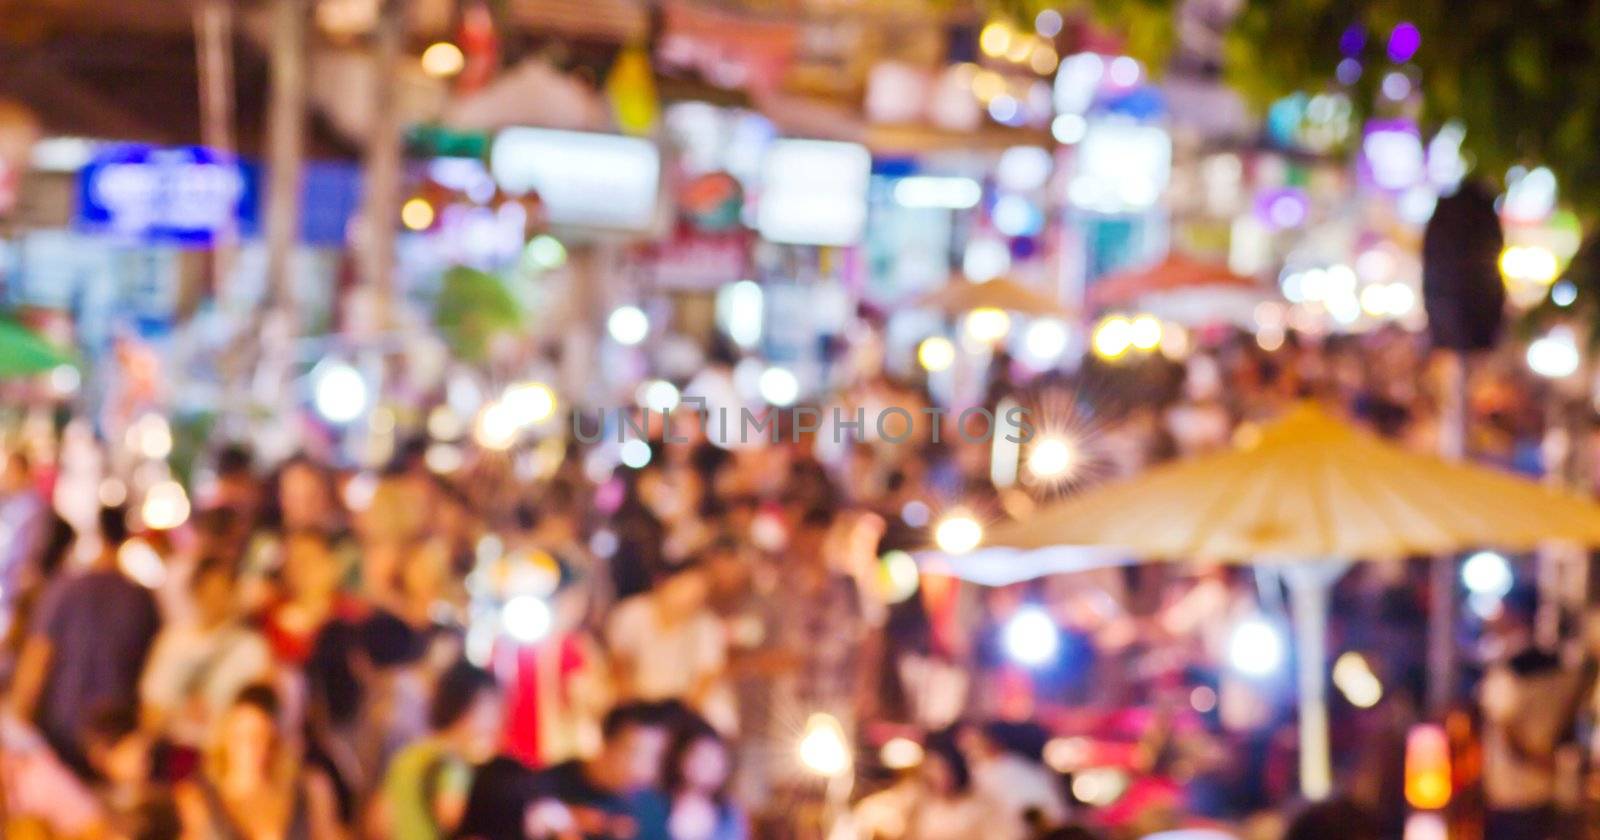 Chiang Mai Walking Street. Out of focus.